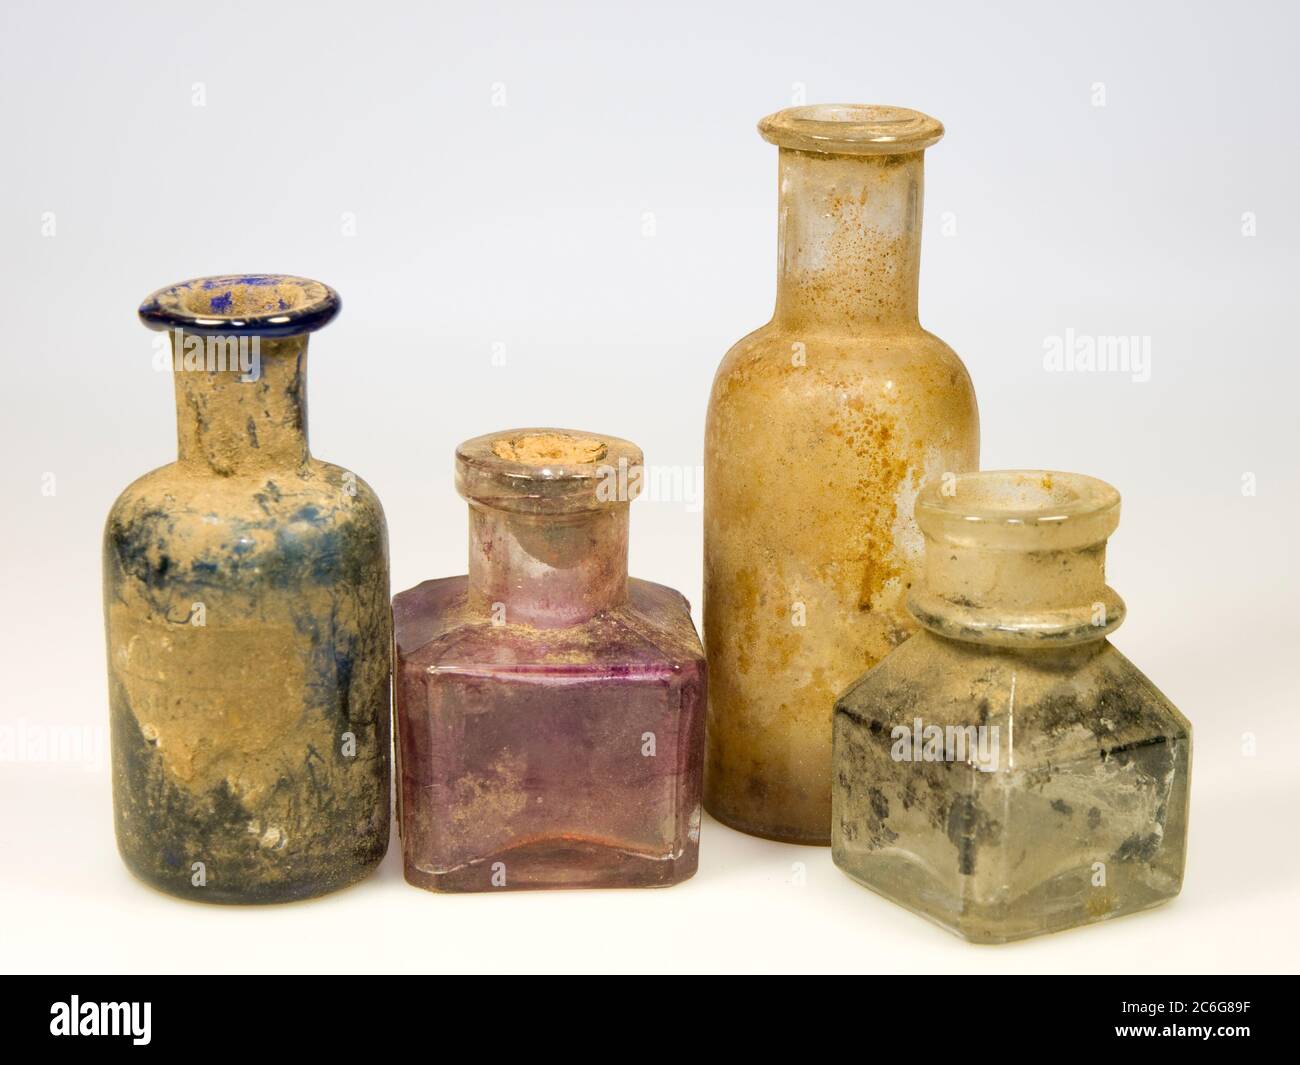 Odl styled dirty glass bottles Stock Photo